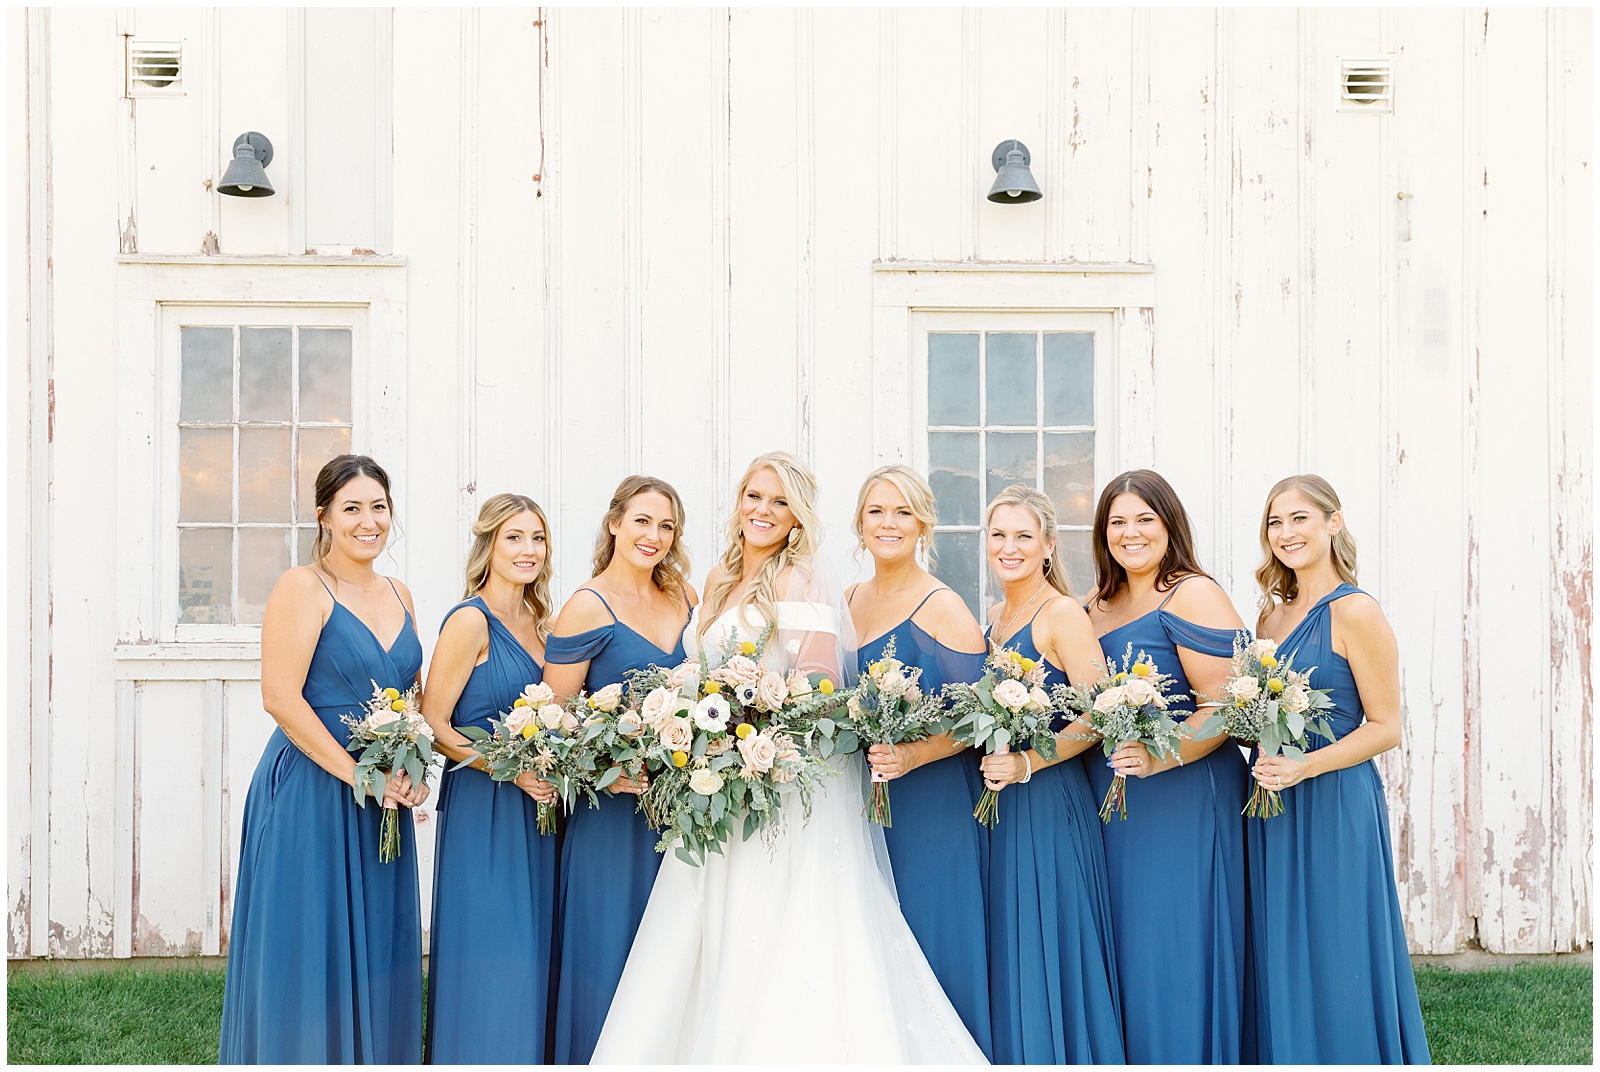 Timeless White Barn at Happy Valley Wedding Bridesmaids in blue